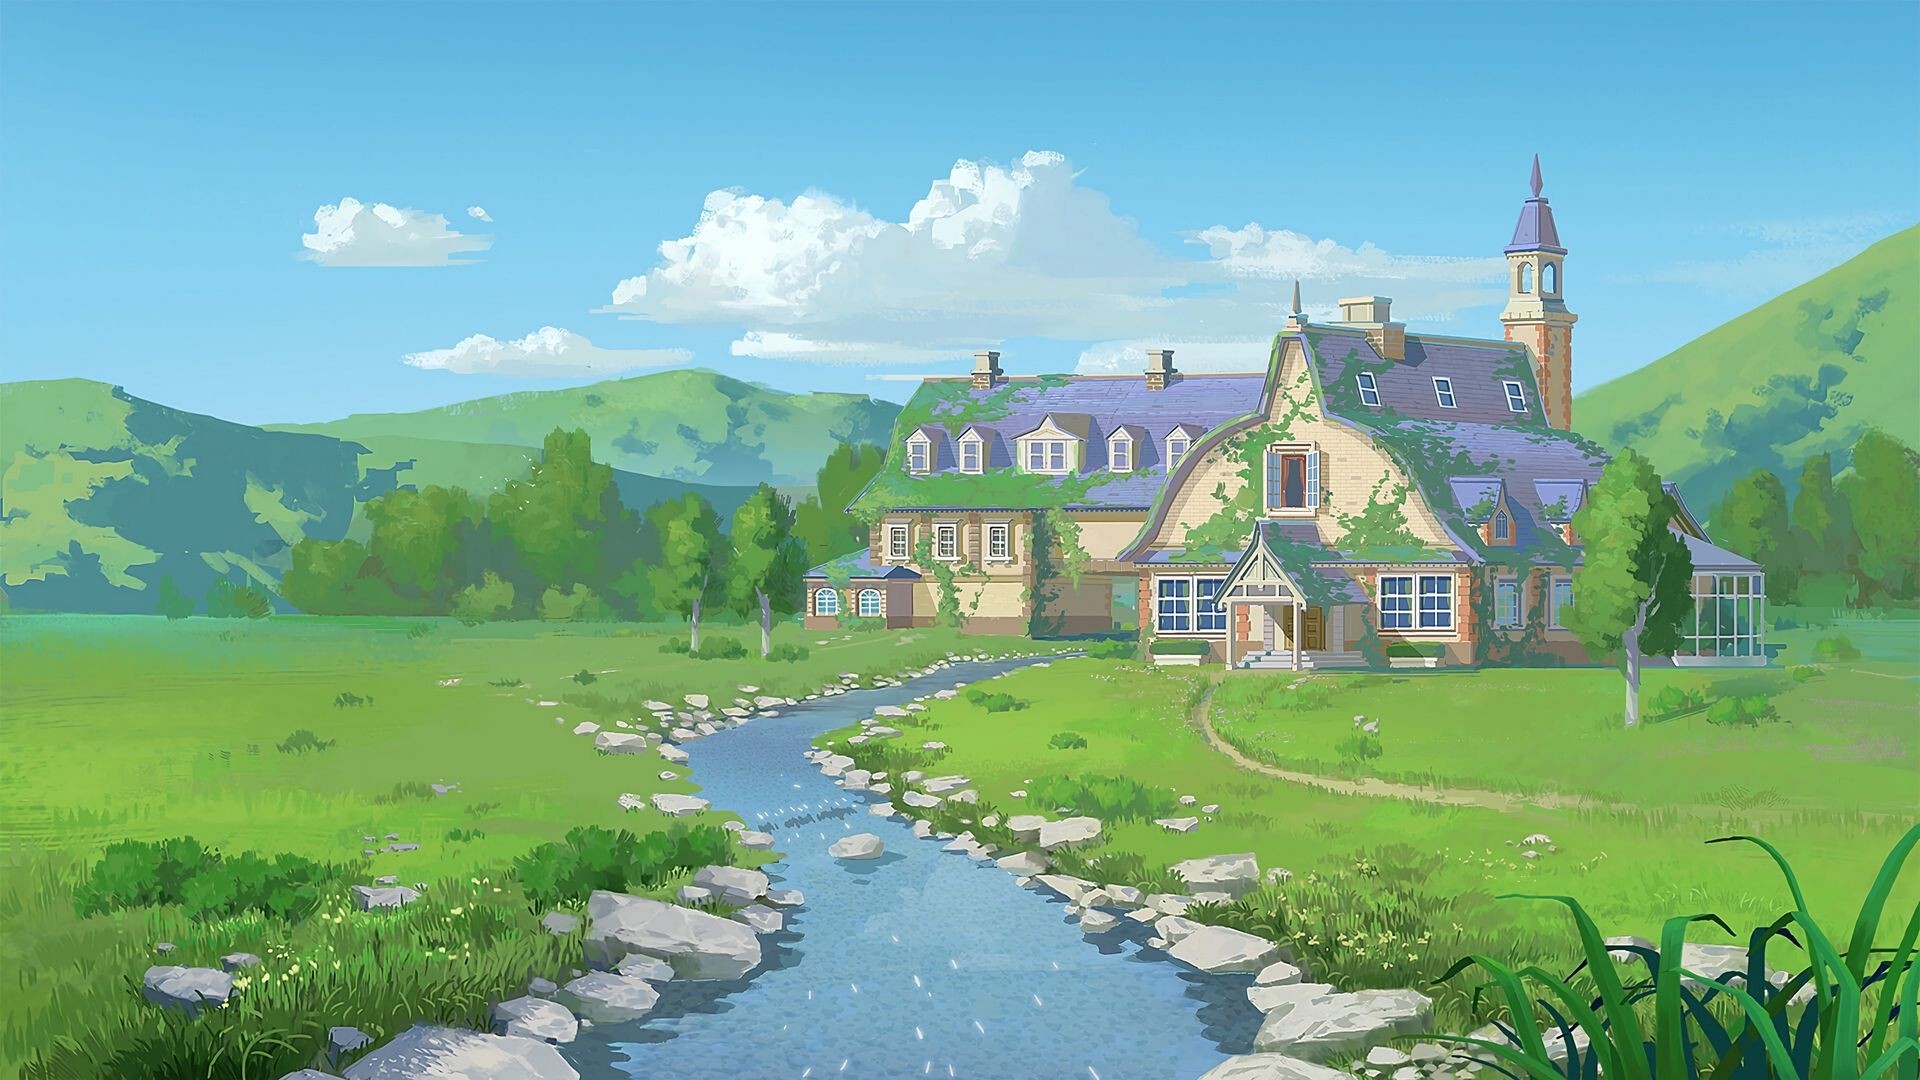 House By The River Art Background Wallpaper